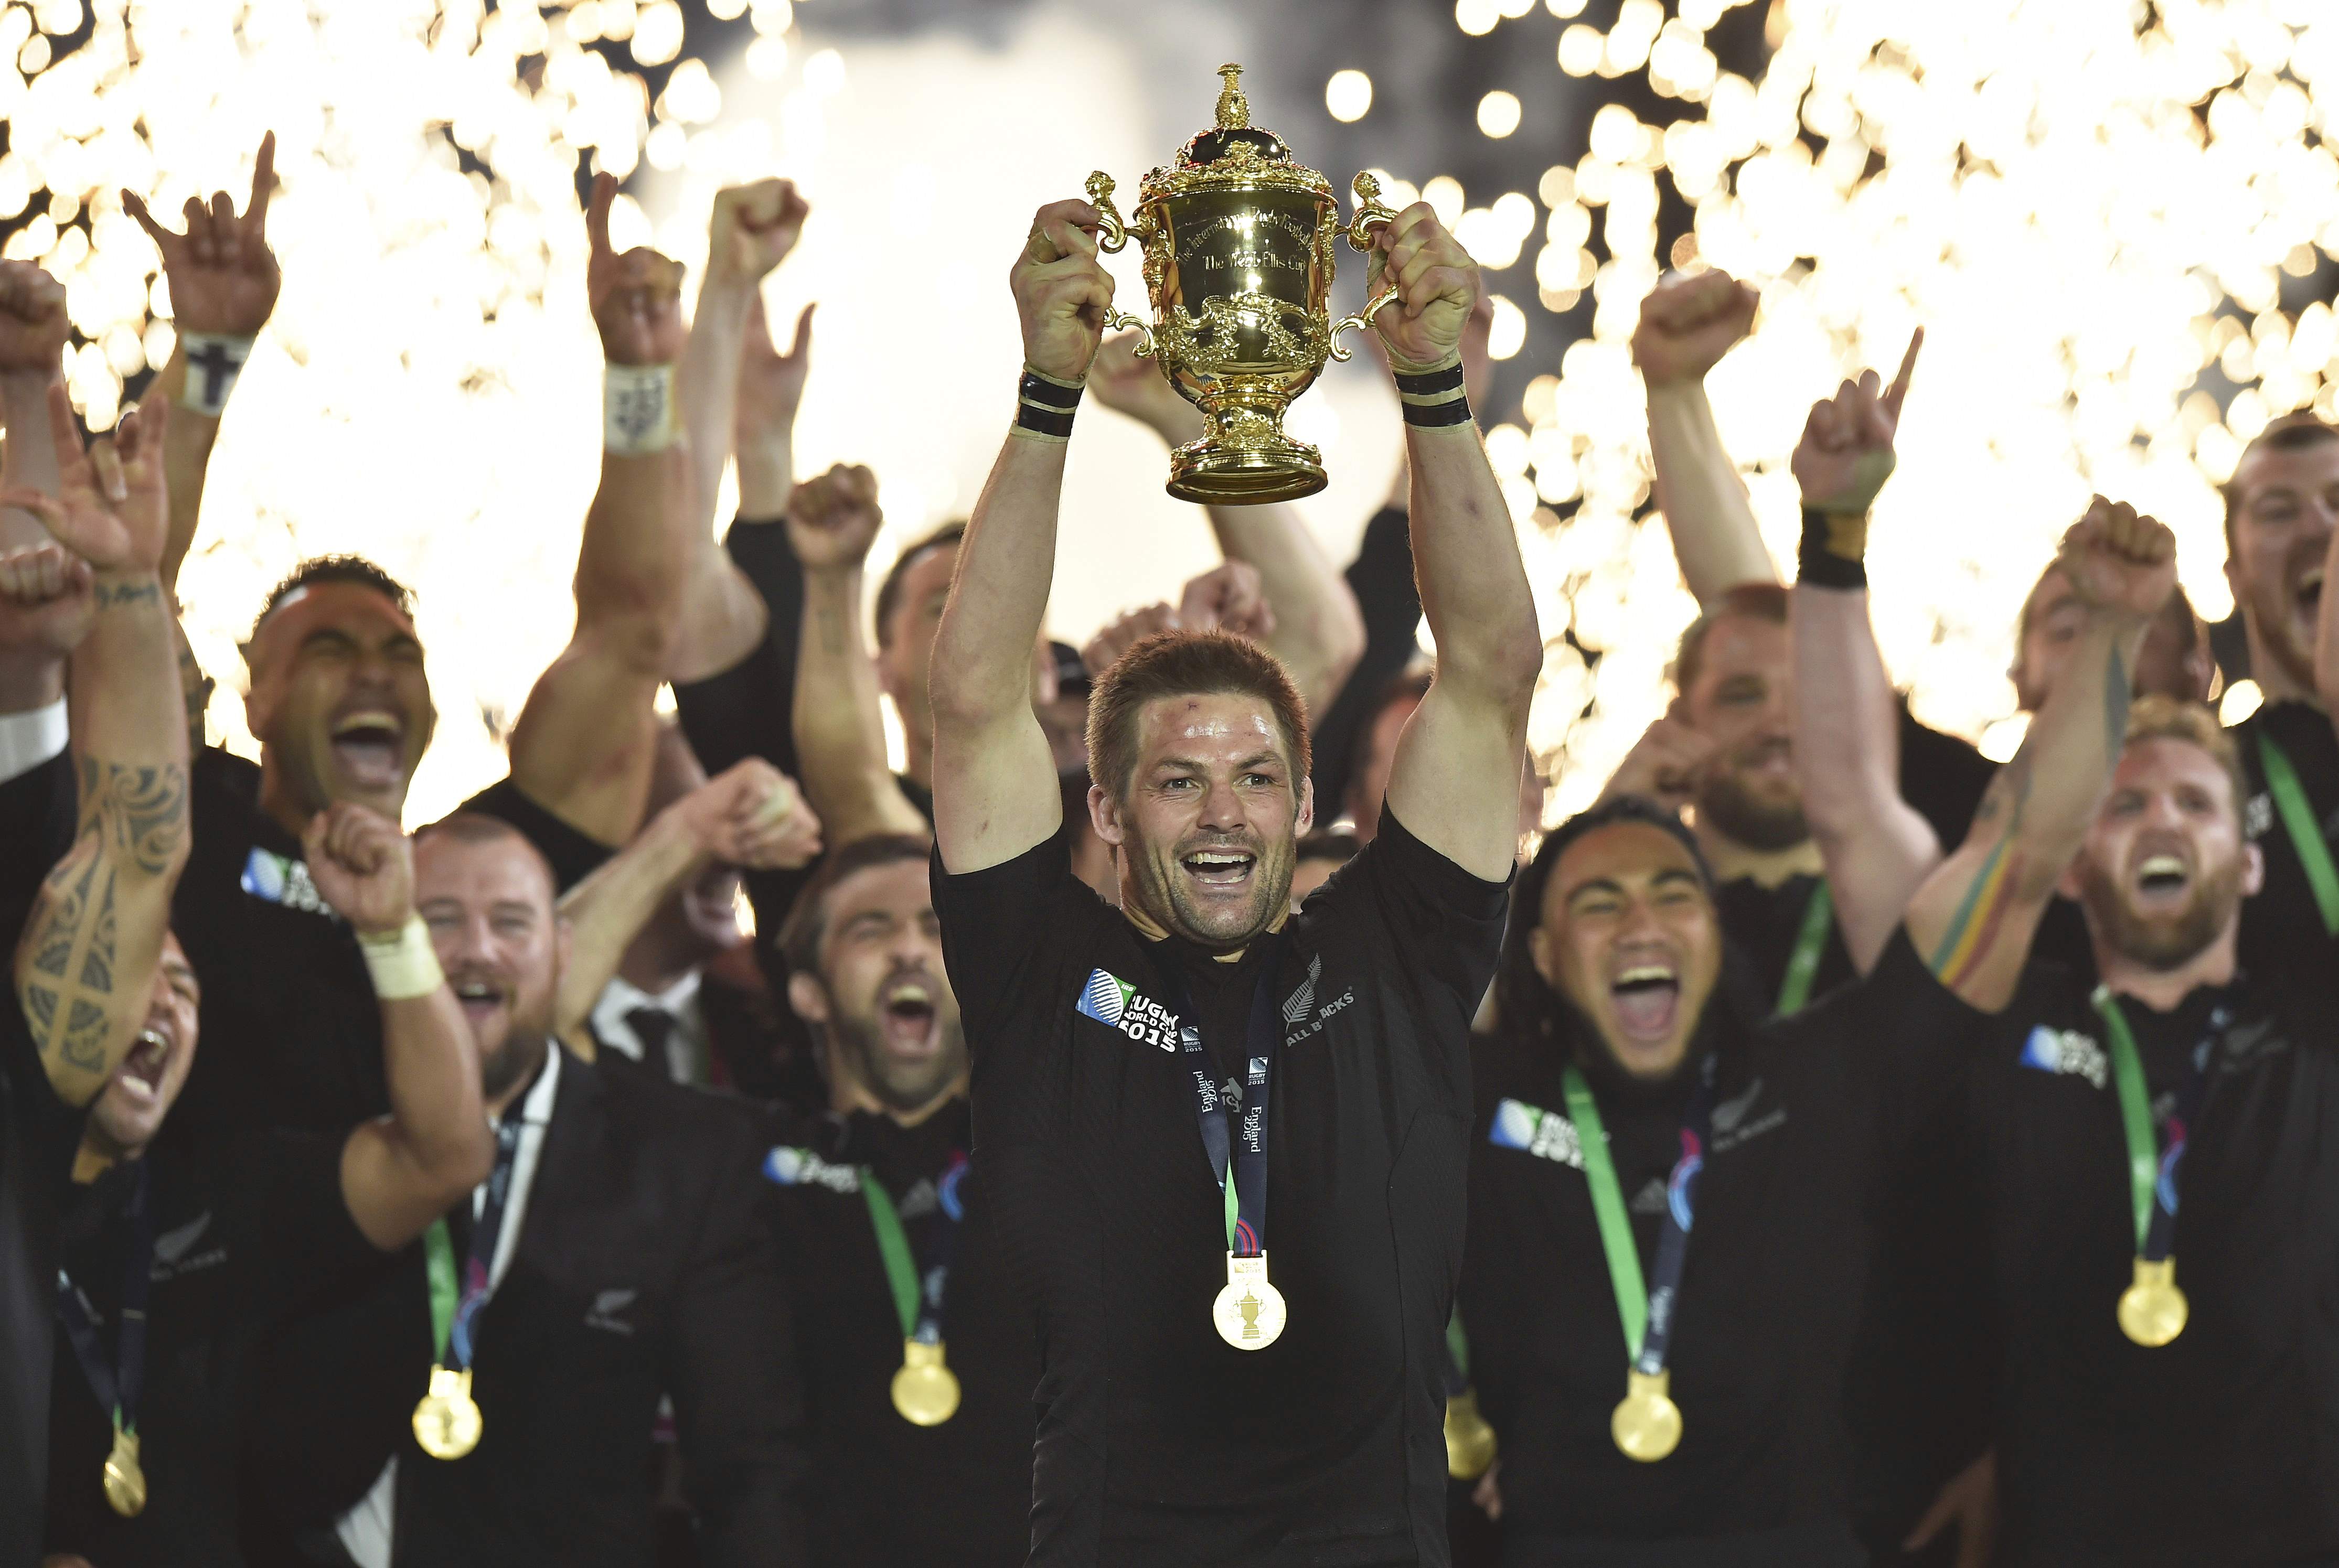 Captain Richie McCaw of New Zealand holds up the Webb Ellis Cup after winning the Rugby World Cup Final against Australia at Twickenham in London, October 31, 2015. New Zealand won by 34-17. REUTERS/Toby Melville TPX IMAGES OF THE DAY